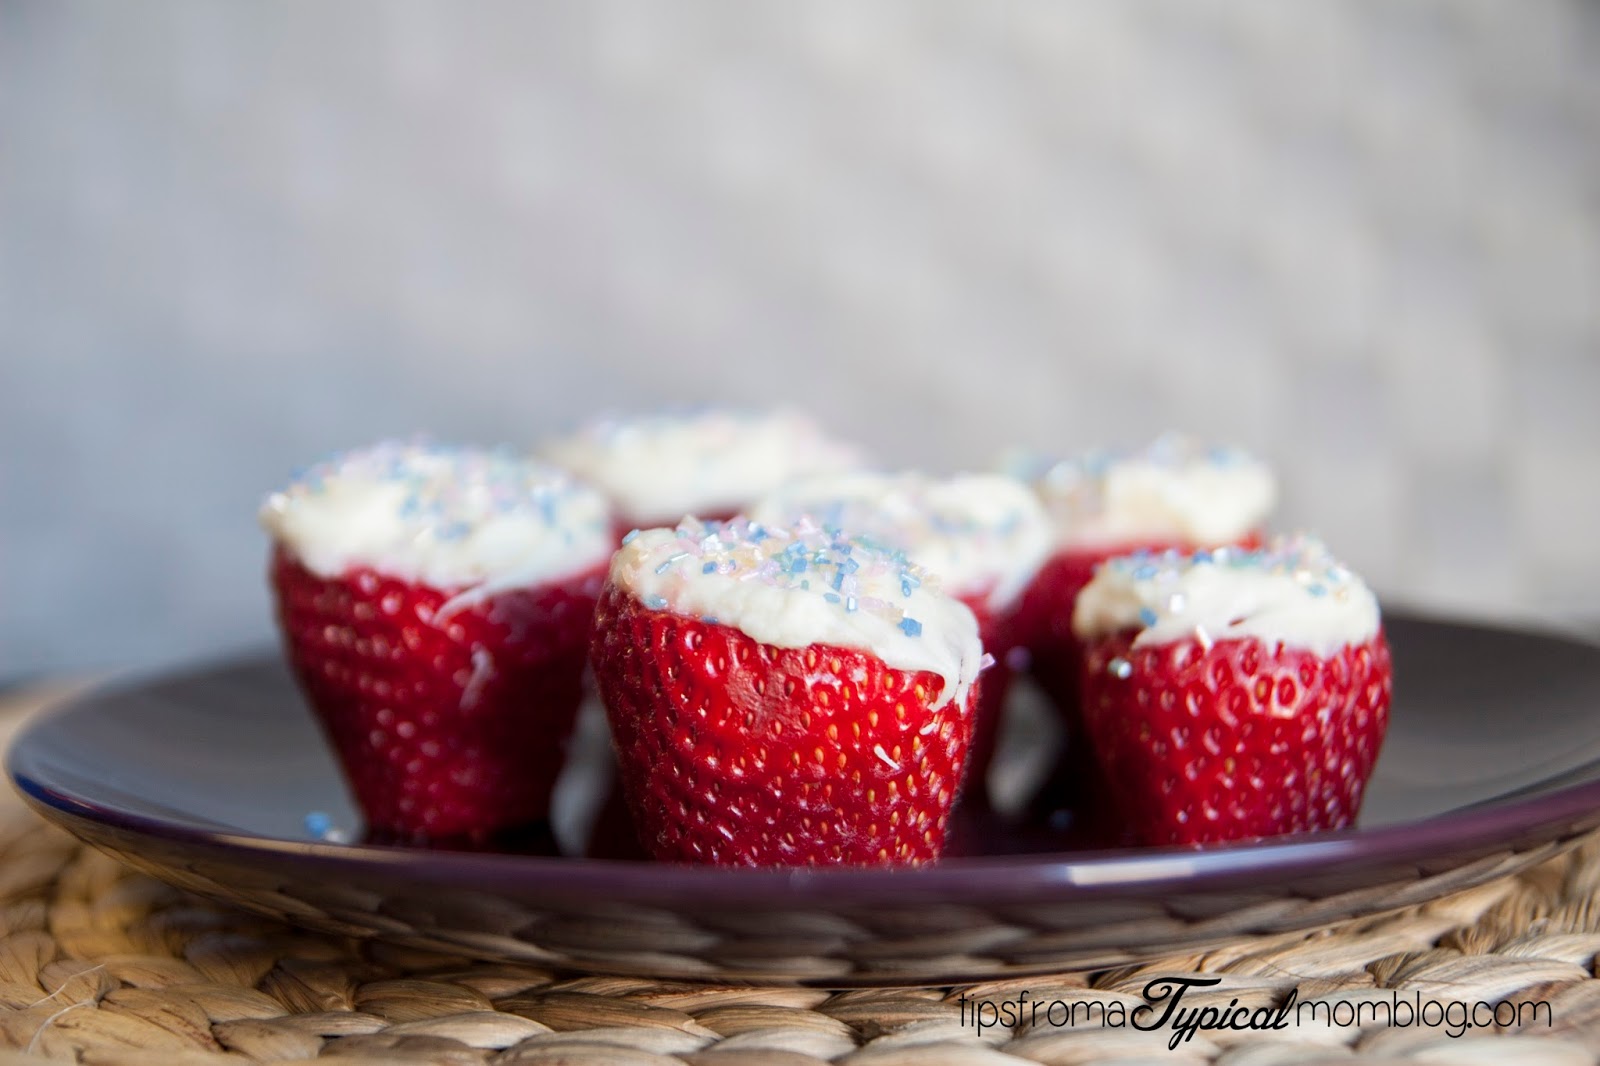 Sweet Cream Cheese Stuffed Strawberries with White Chocolate. Perfect for Easter or any Spring party. From Tips From a Typical Mom